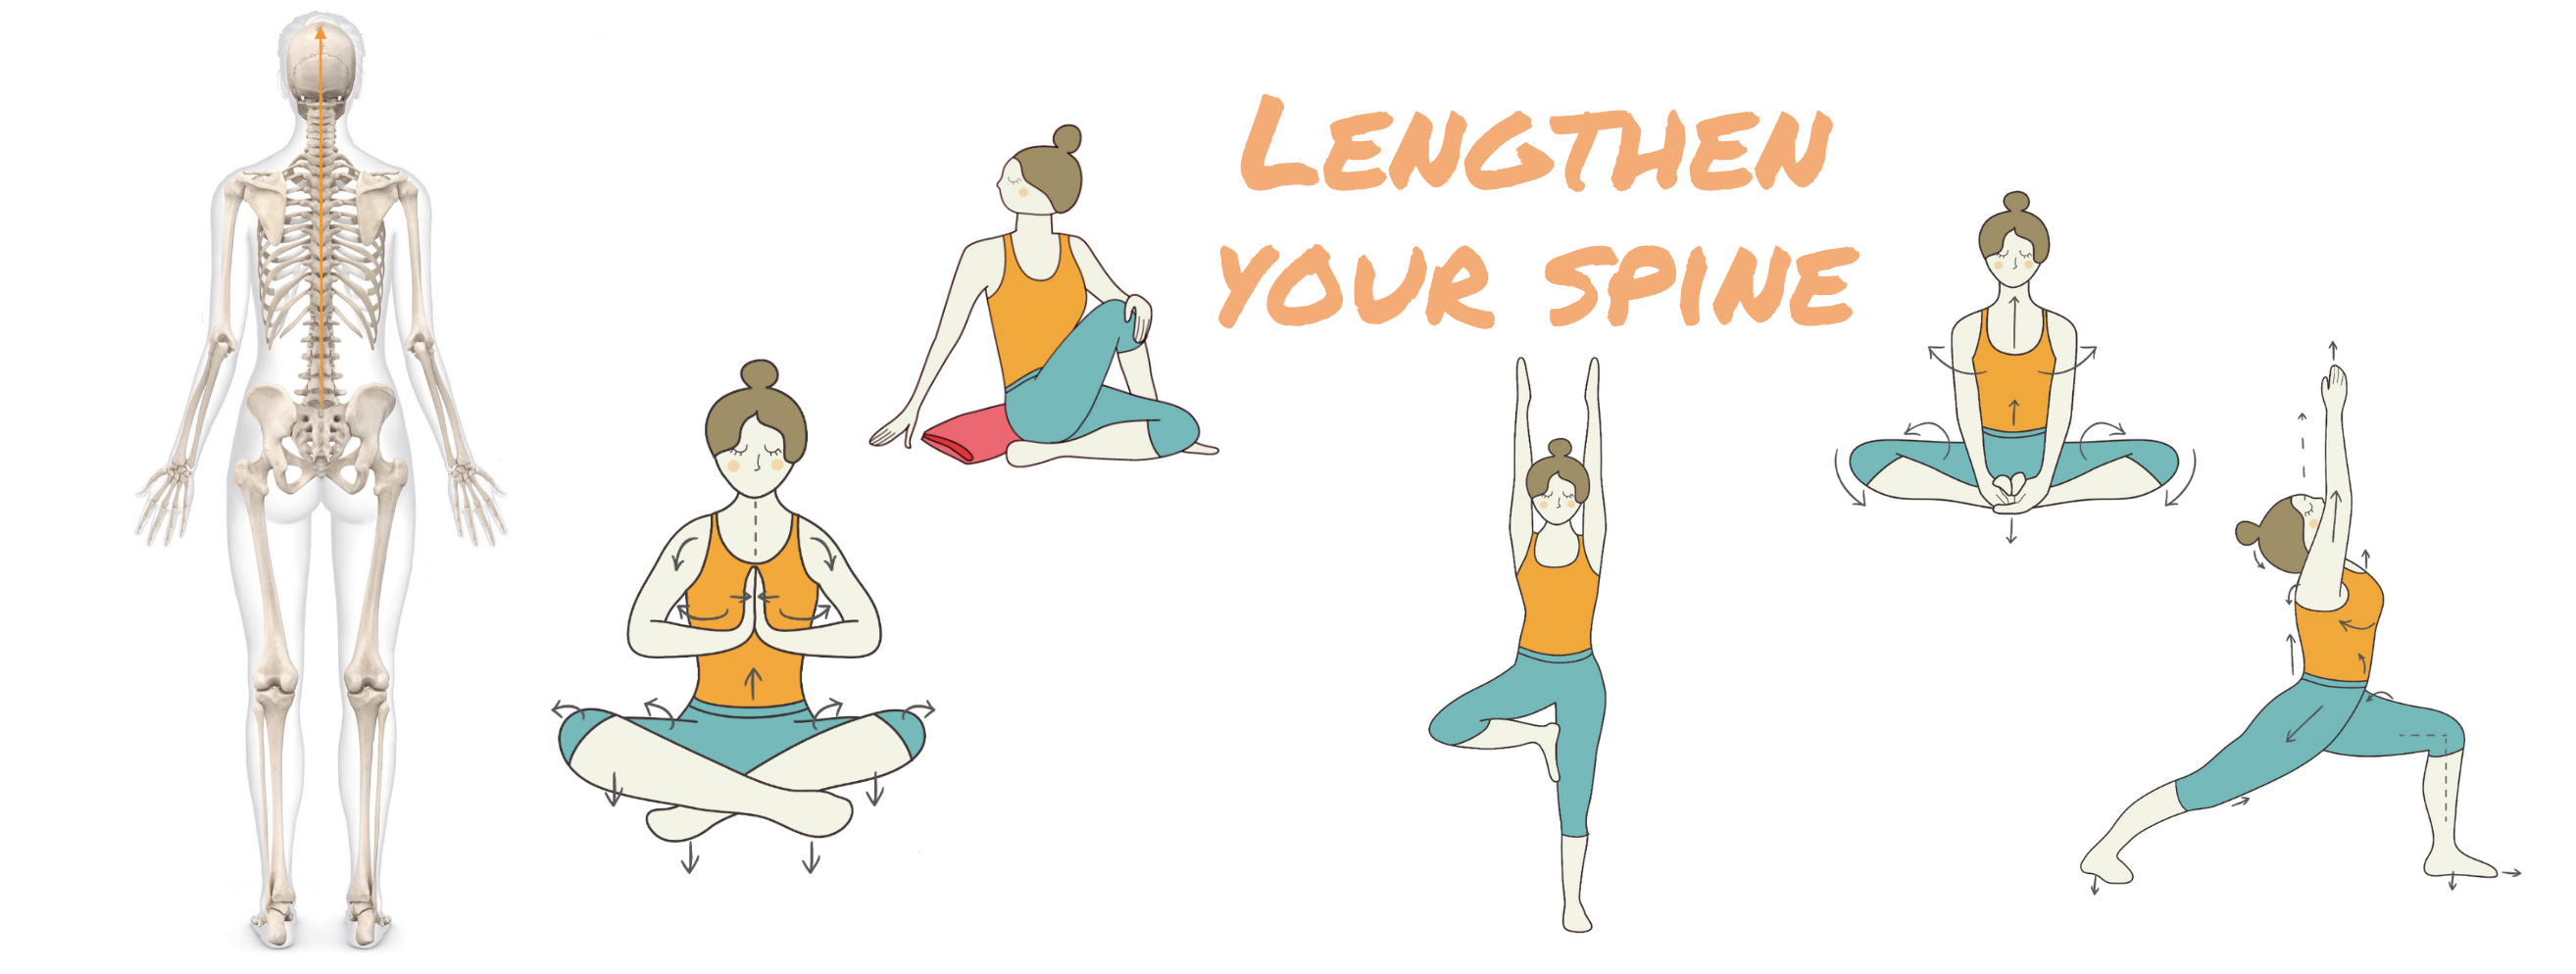 Lengthen your spine